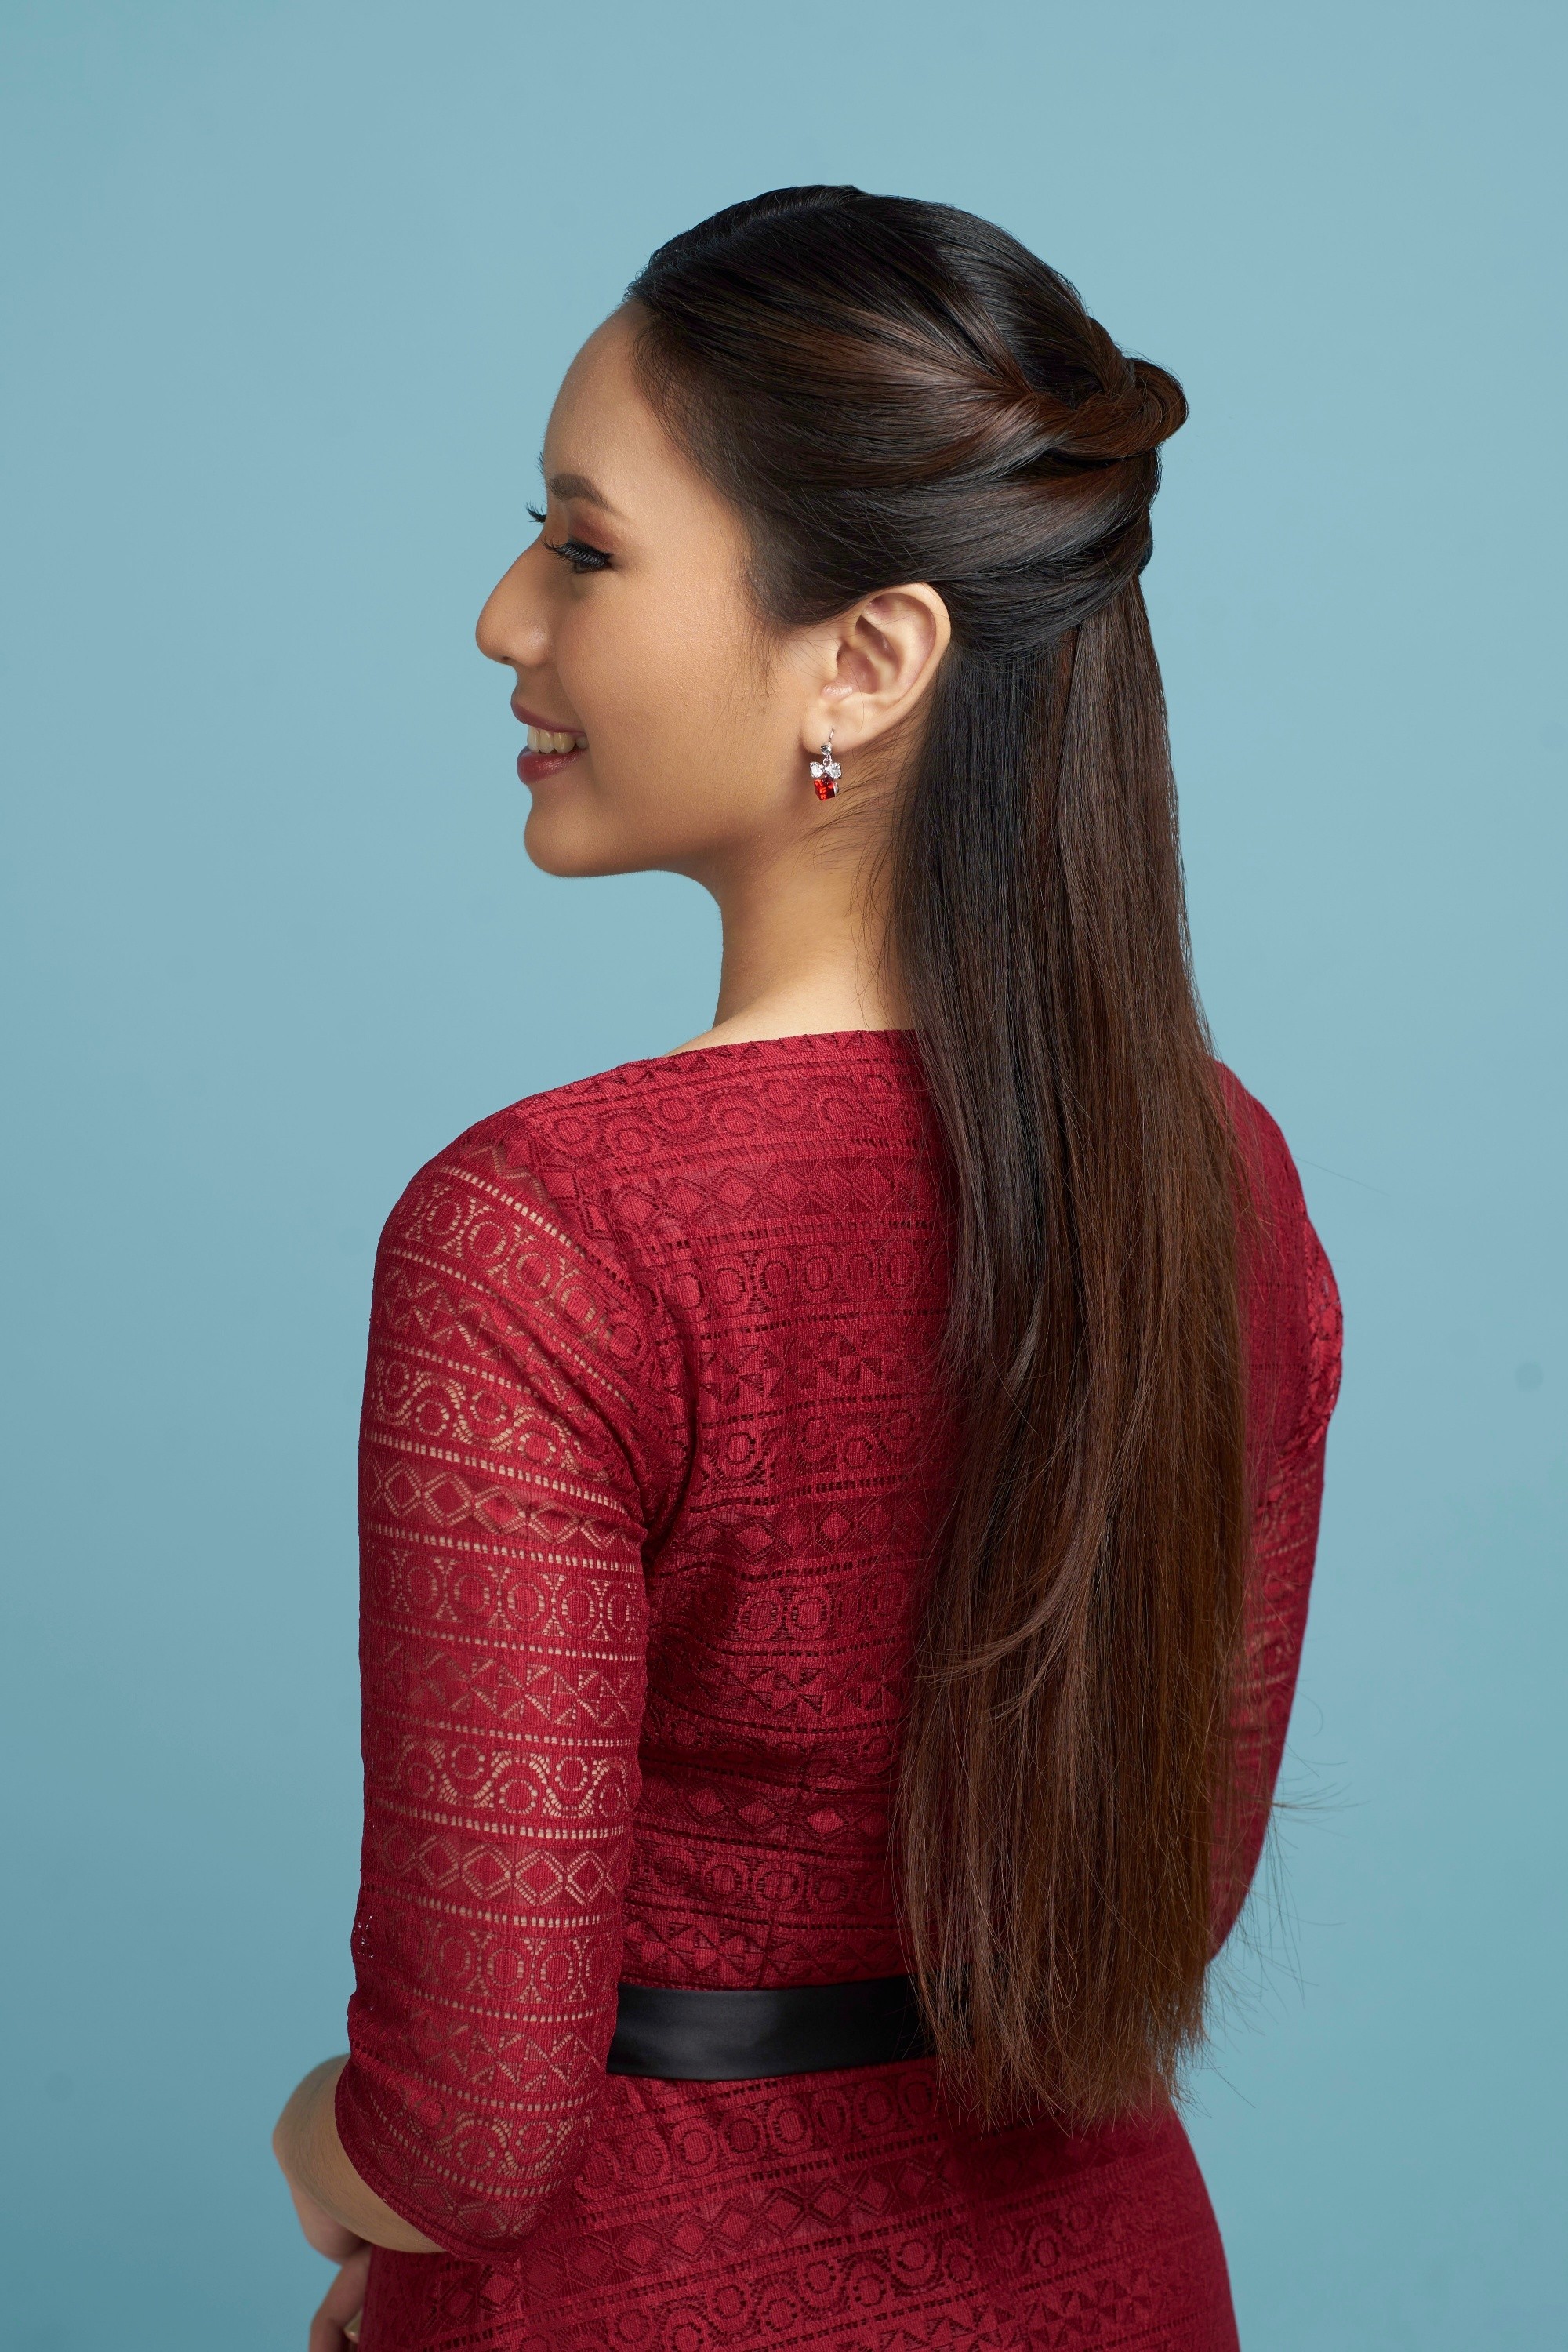 Asian woman with a half up criss cross Valentine hairstyle wearing a red dress